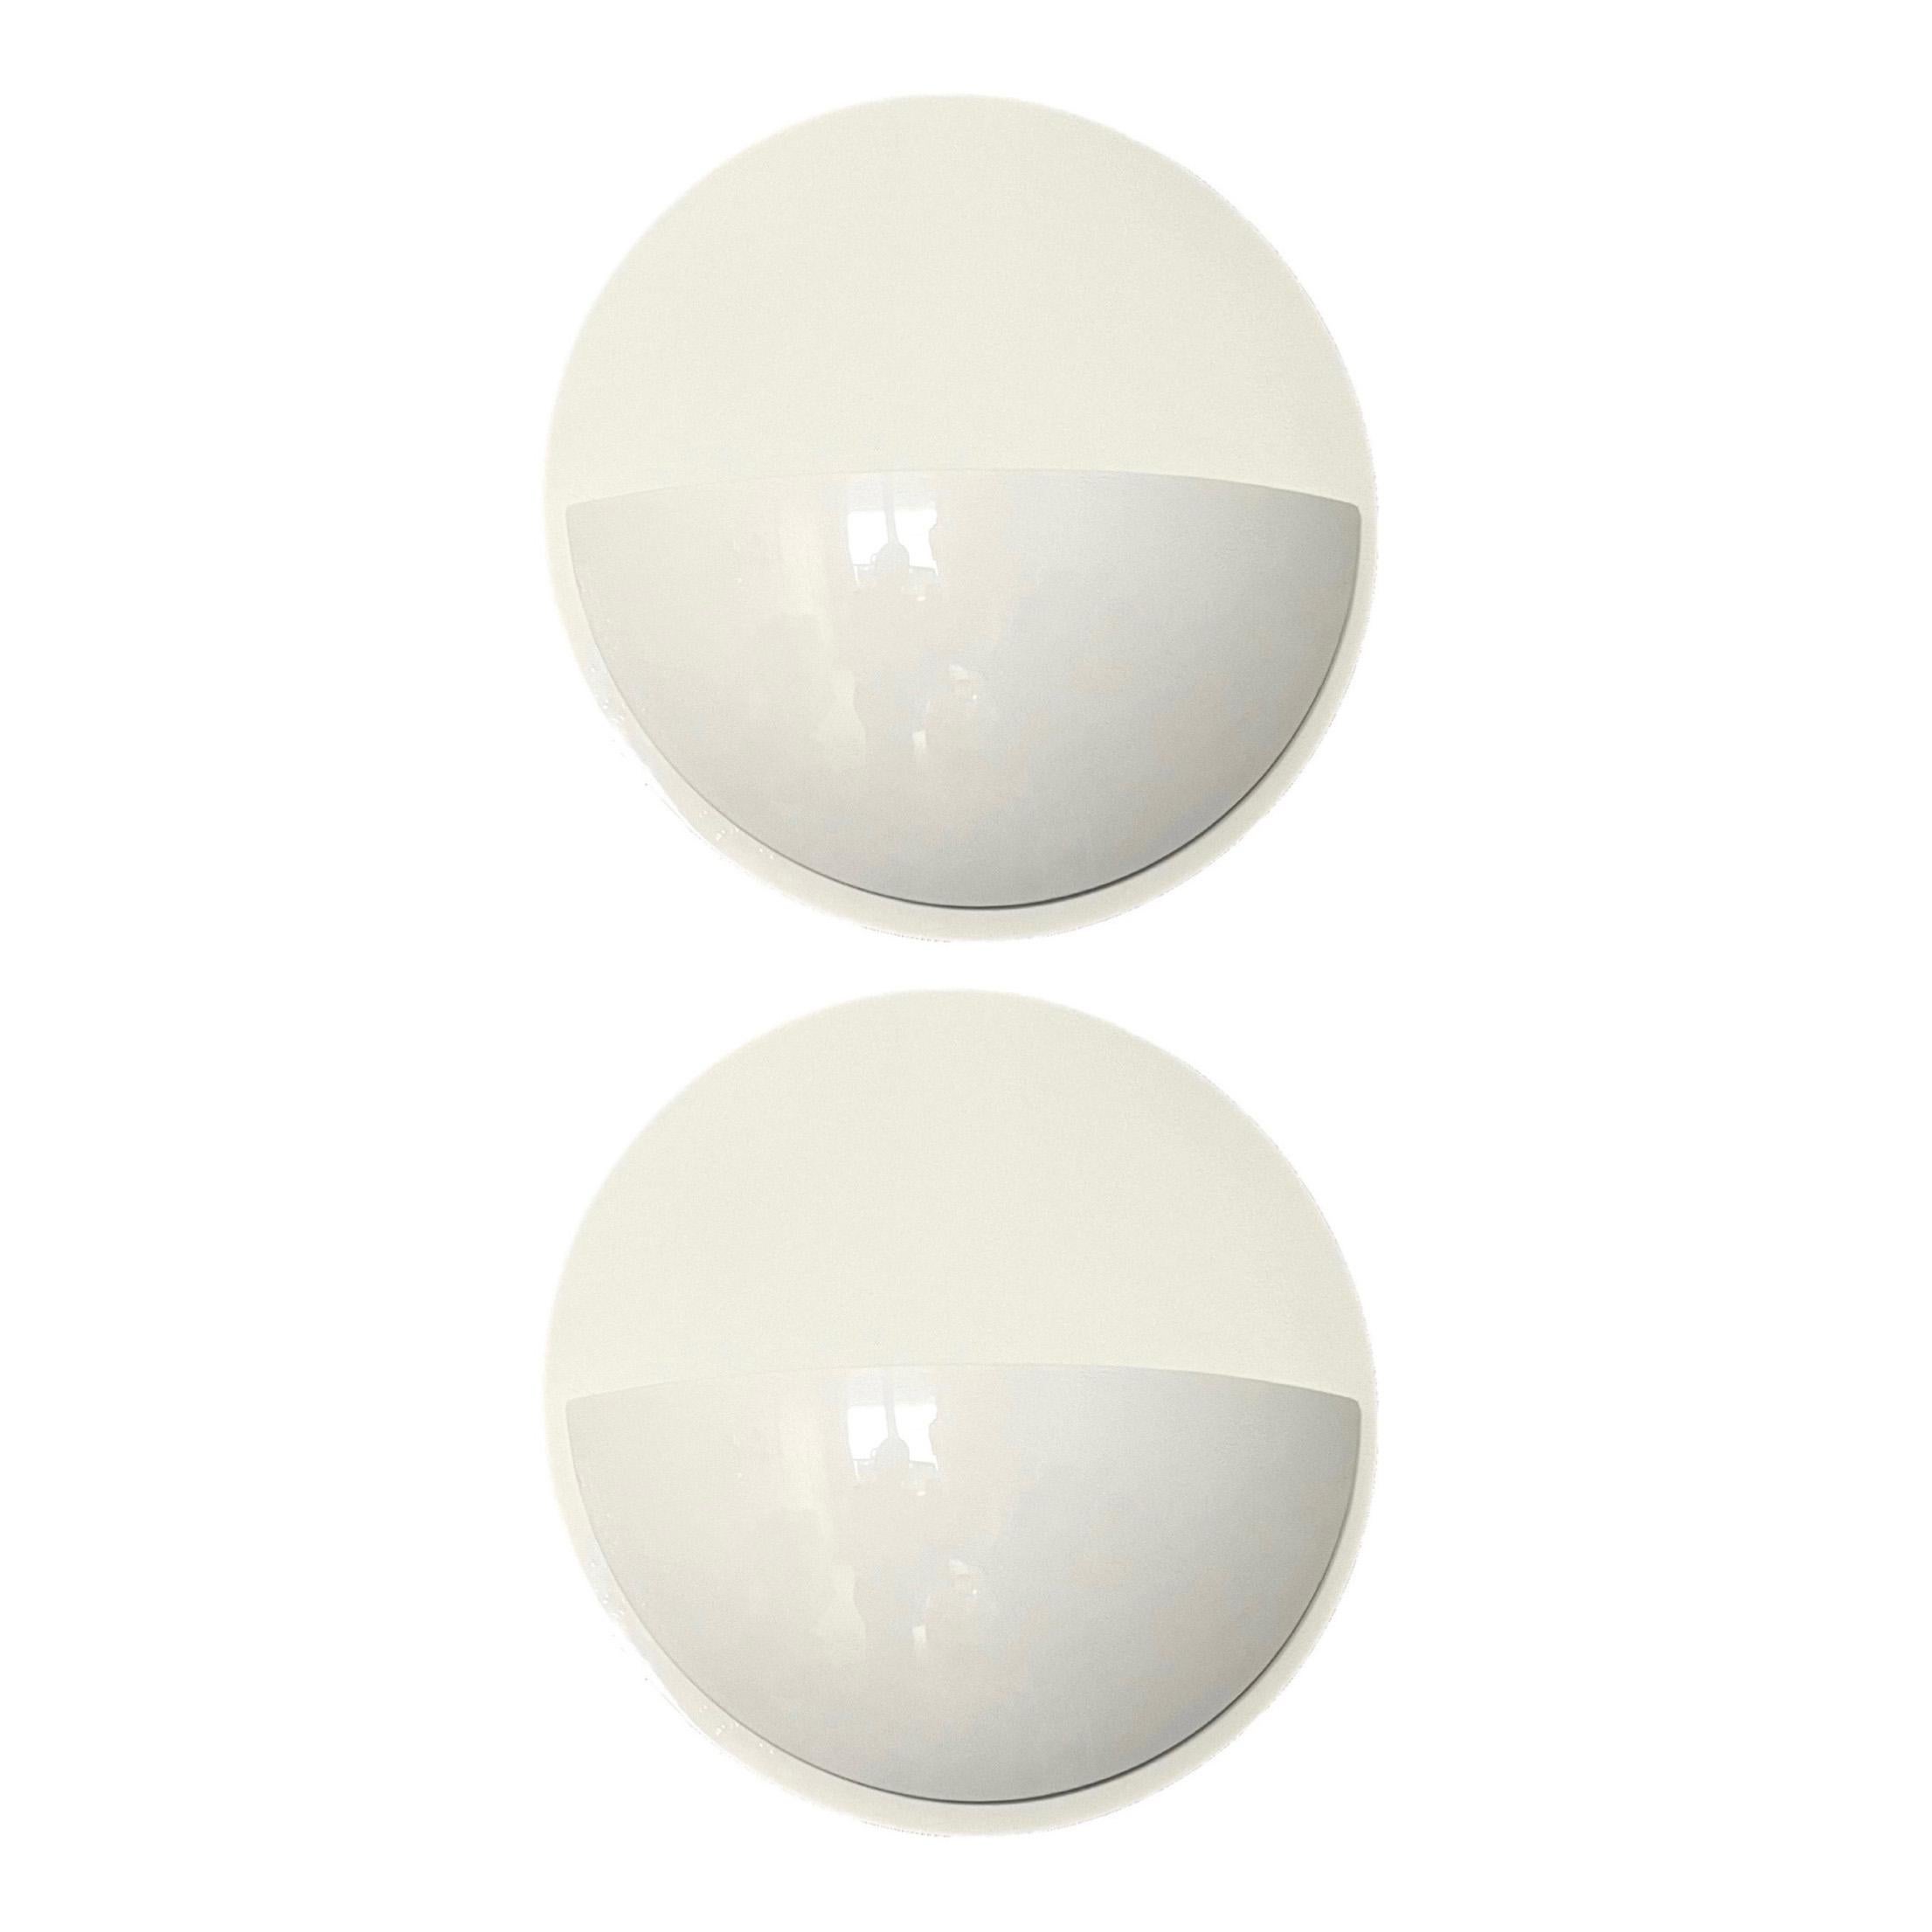 Cool and beauty Postmodern pair of metal wall sconces by Leonardo Marelli for Estiluz. Model: A-1080 Blanco. With light dimmer. The light is dimmable with a button at the botton.
These lamps were made in Barcelona (Spain) by Estiluz during